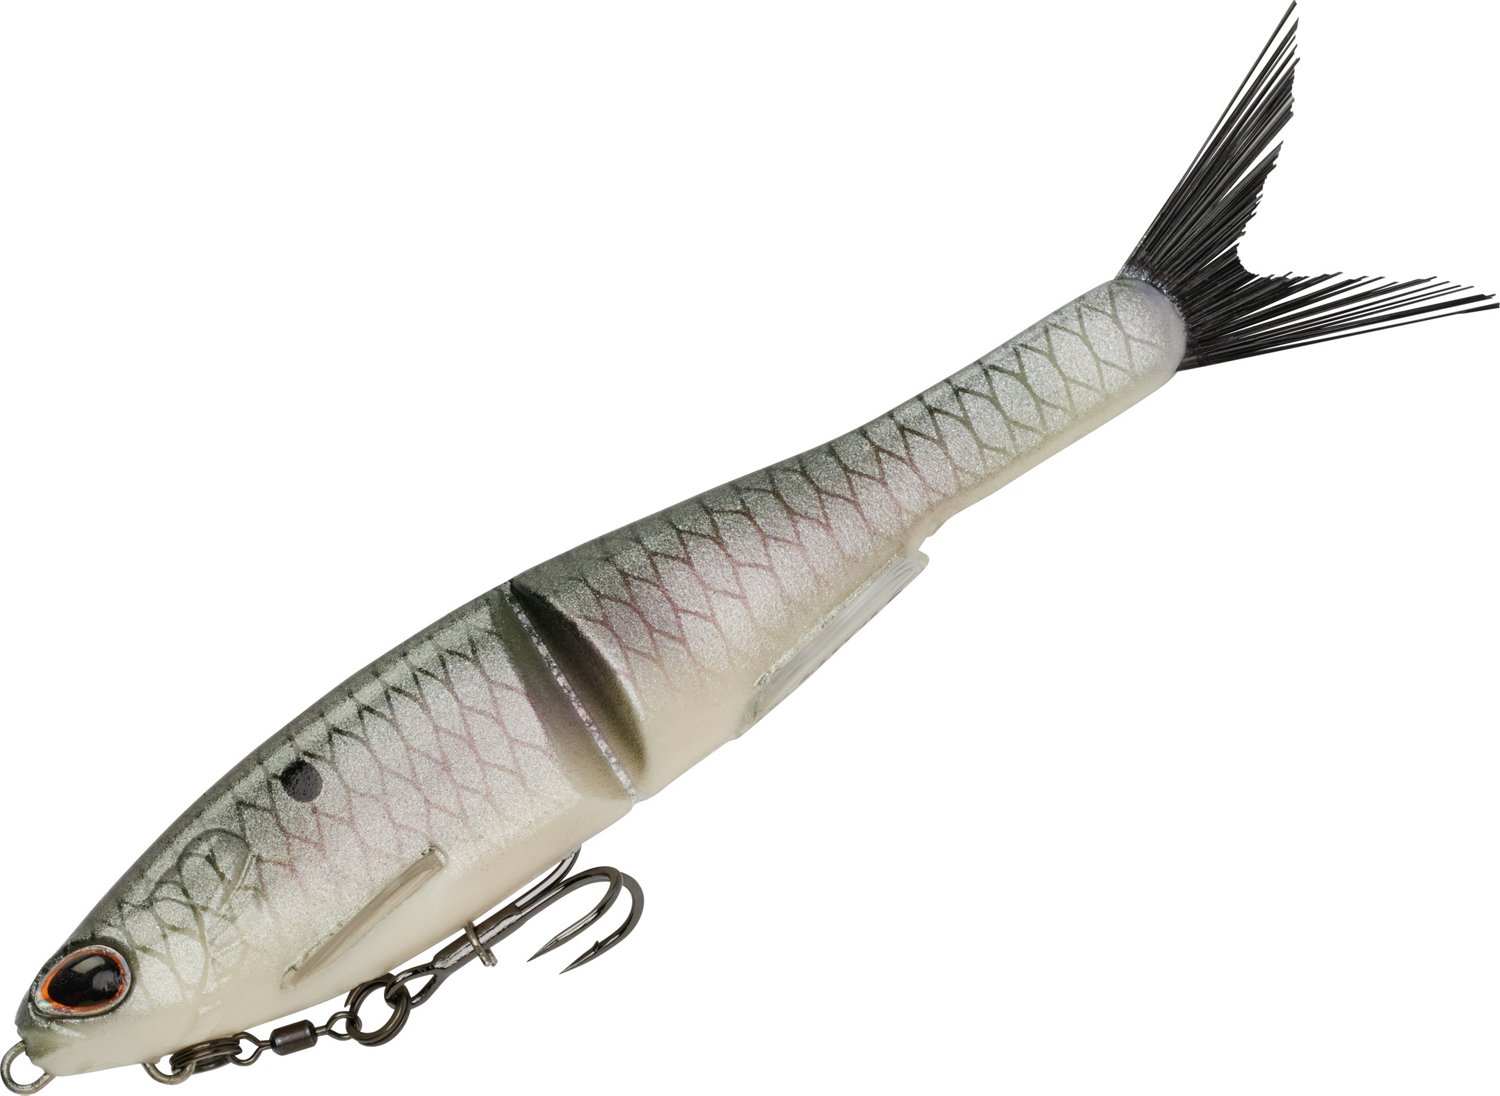 Academy Sports + Outdoors Lake Fork Trophy Lures Ring-Fry Soft Plastic  Baits 8-Pack